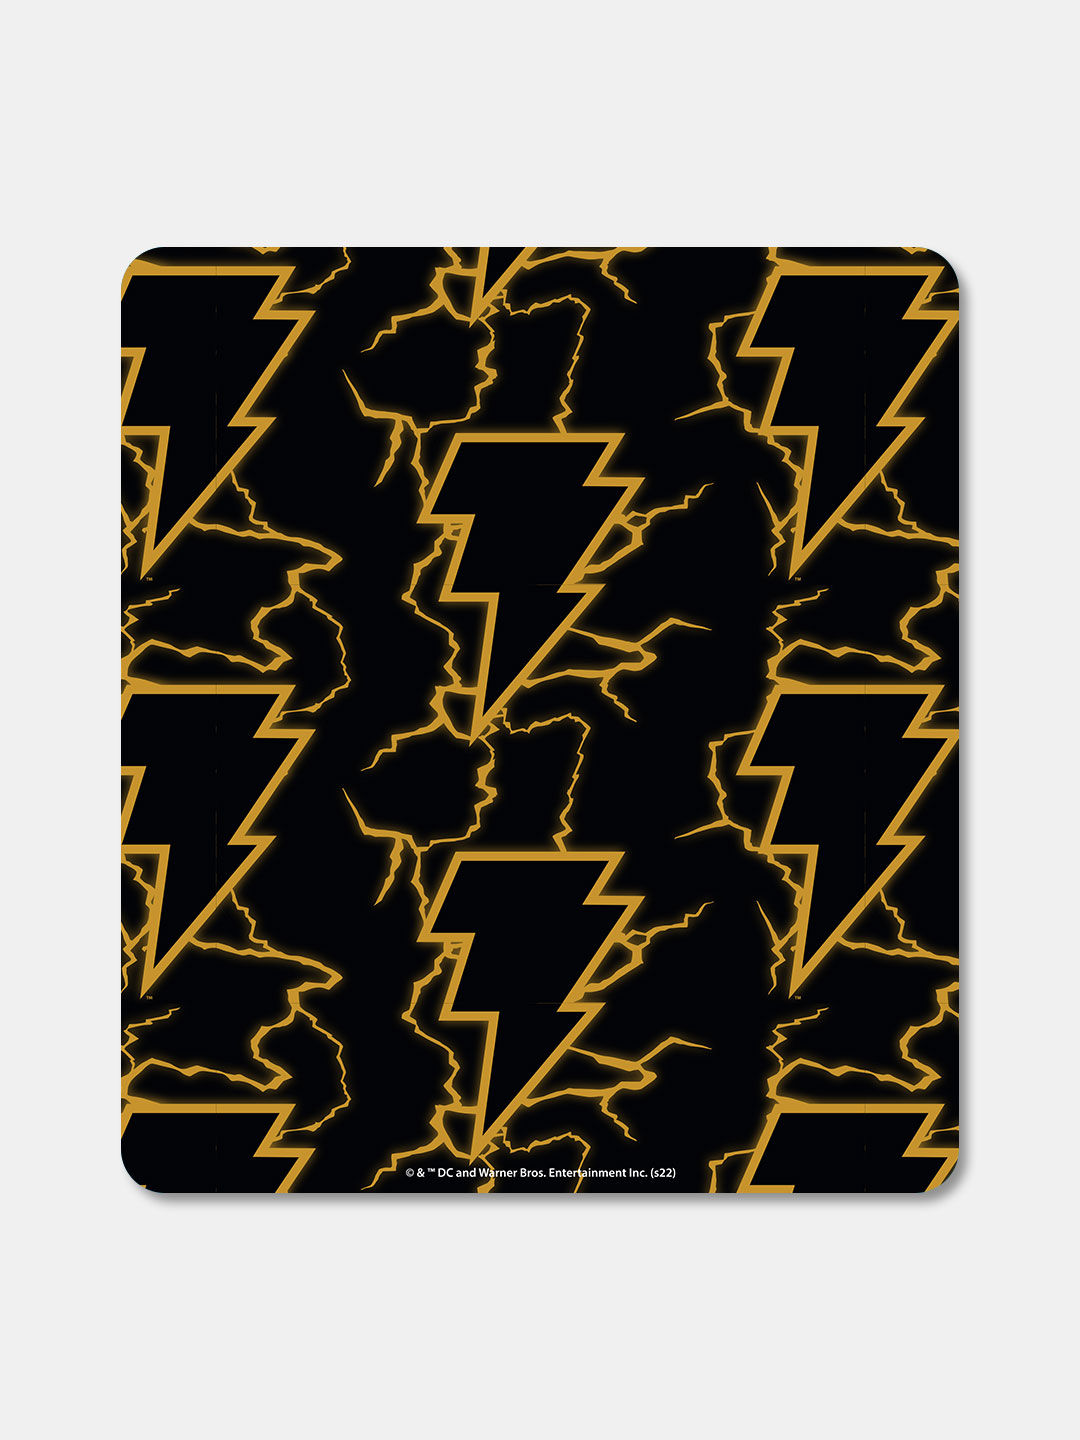 Buy Bolt Lighting - Macmerise Mouse Pad Mouse Pads Online